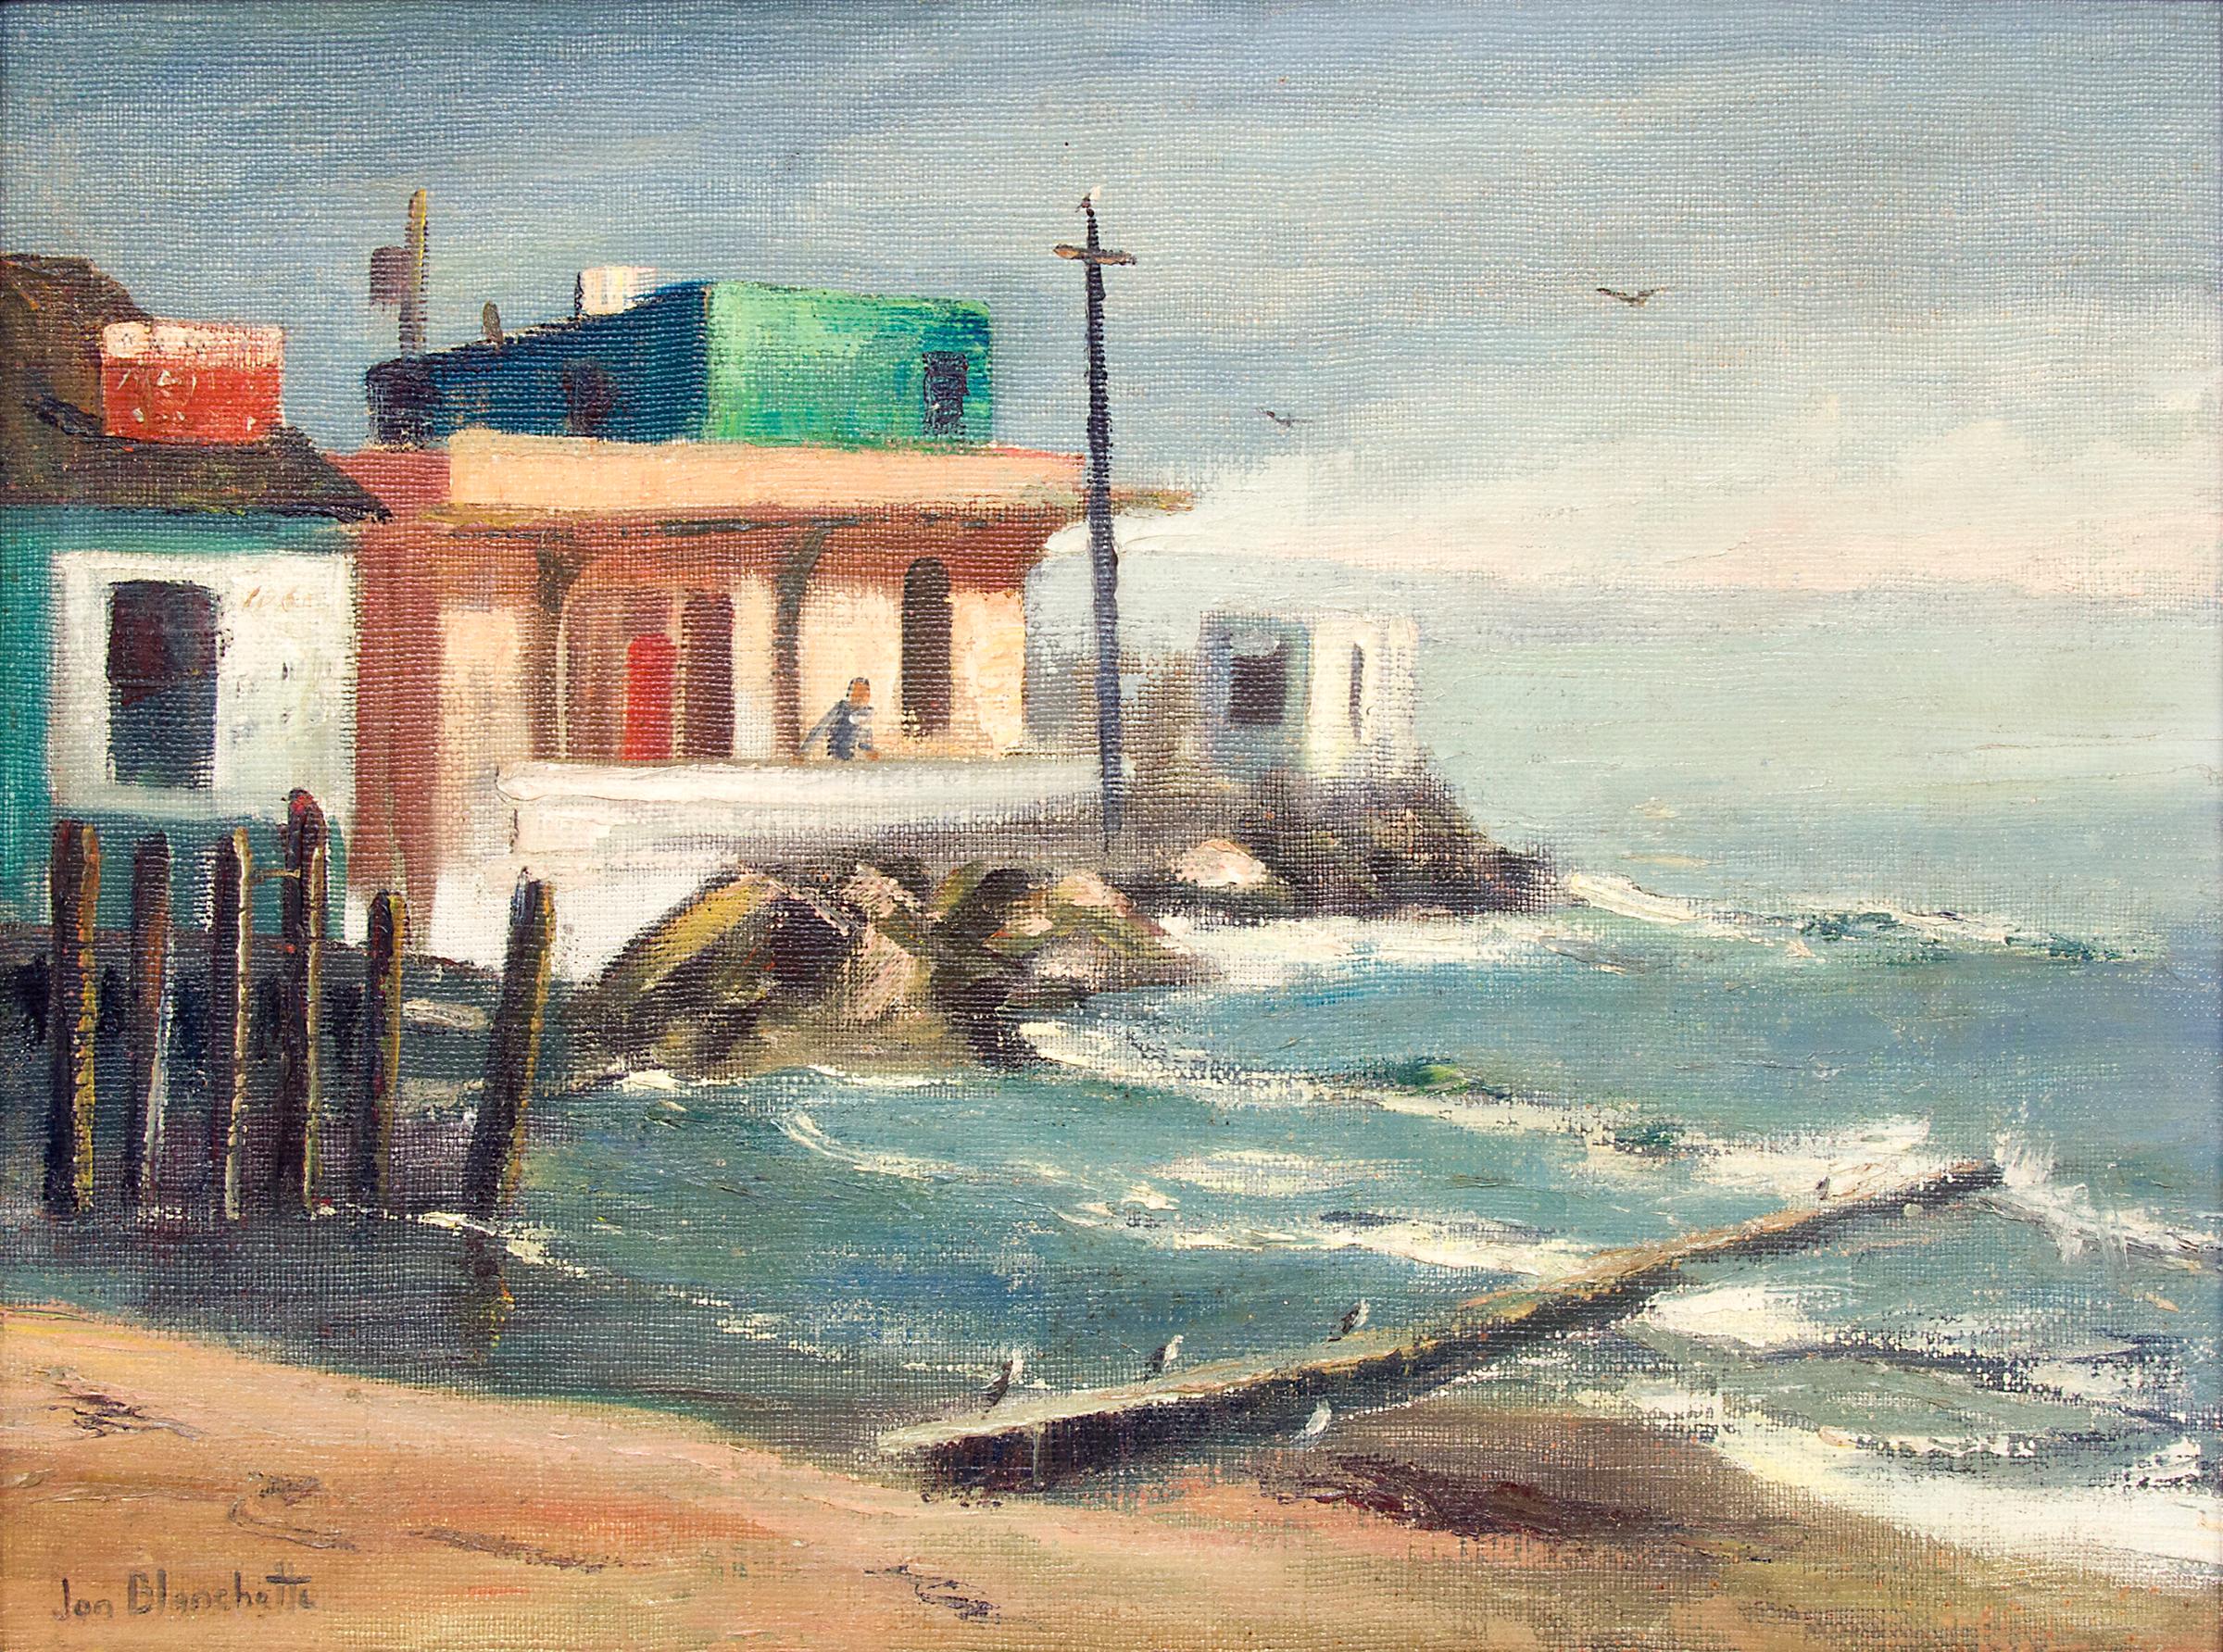 Capitola, California, 1950s Framed California Seascape Marine Oil Painting - Gray Figurative Painting by Jon Blanchette